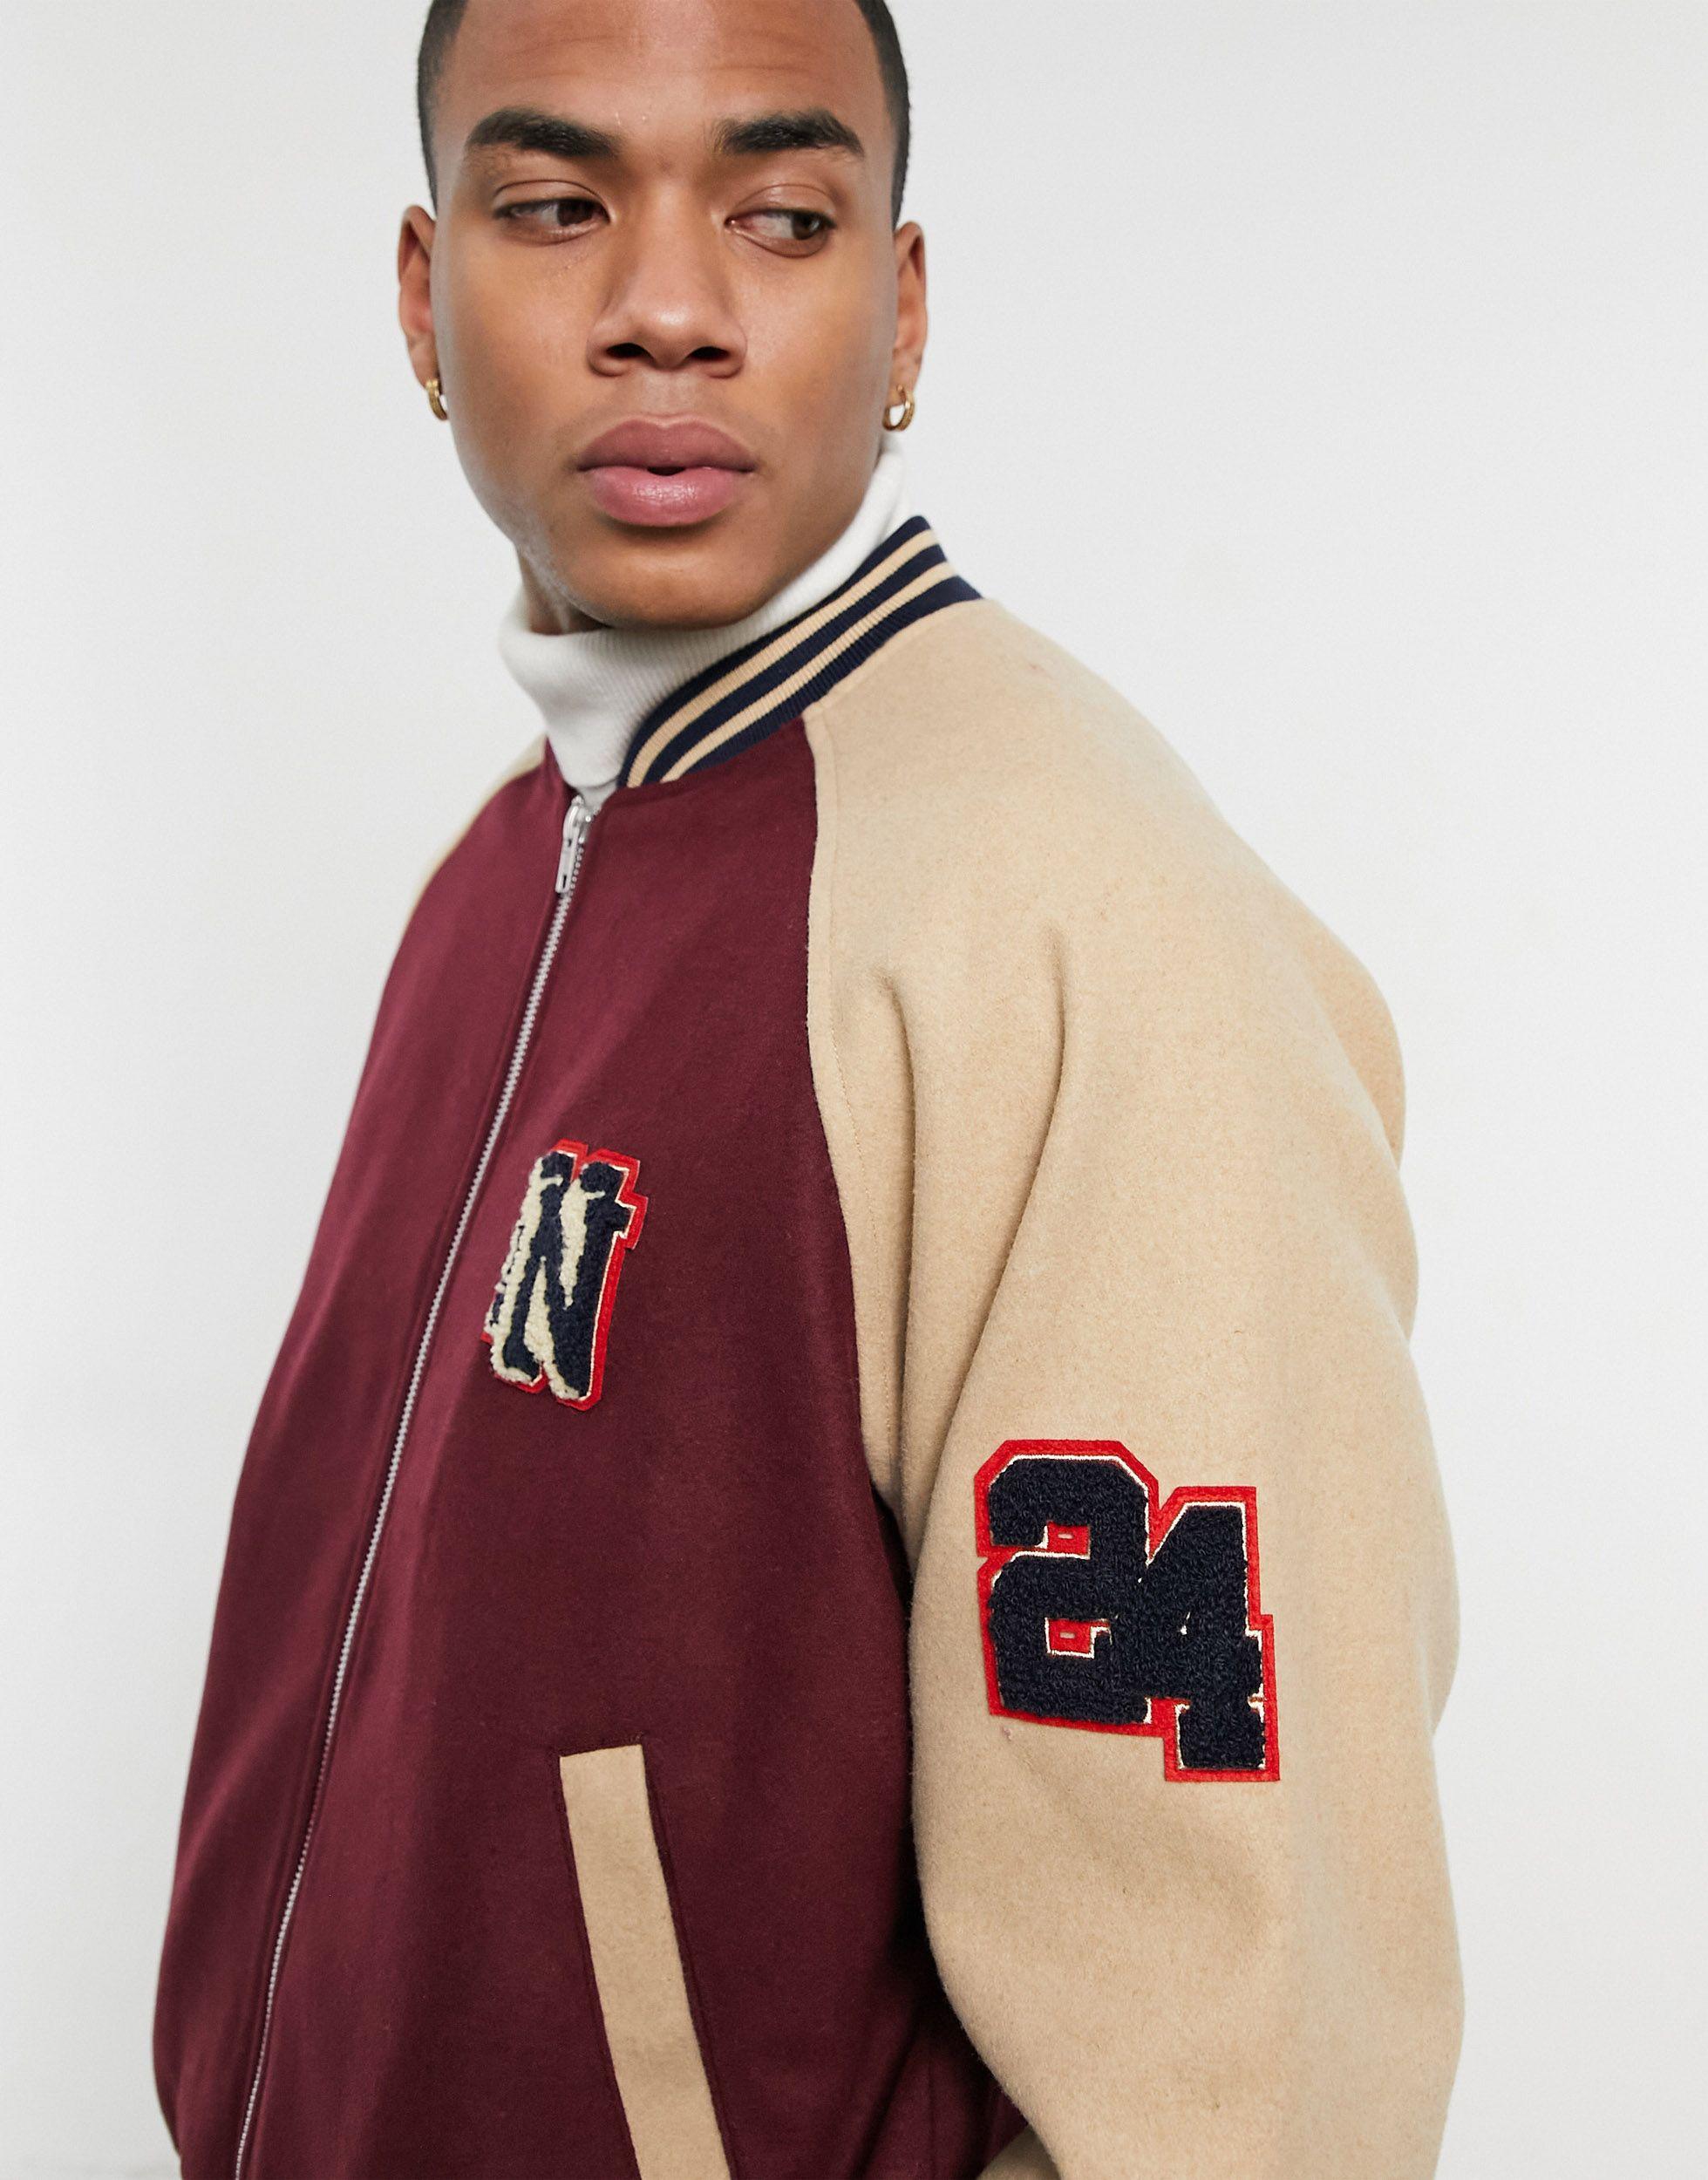 ASOS DESIGN faux leather varsity jacket with embroidery in brown